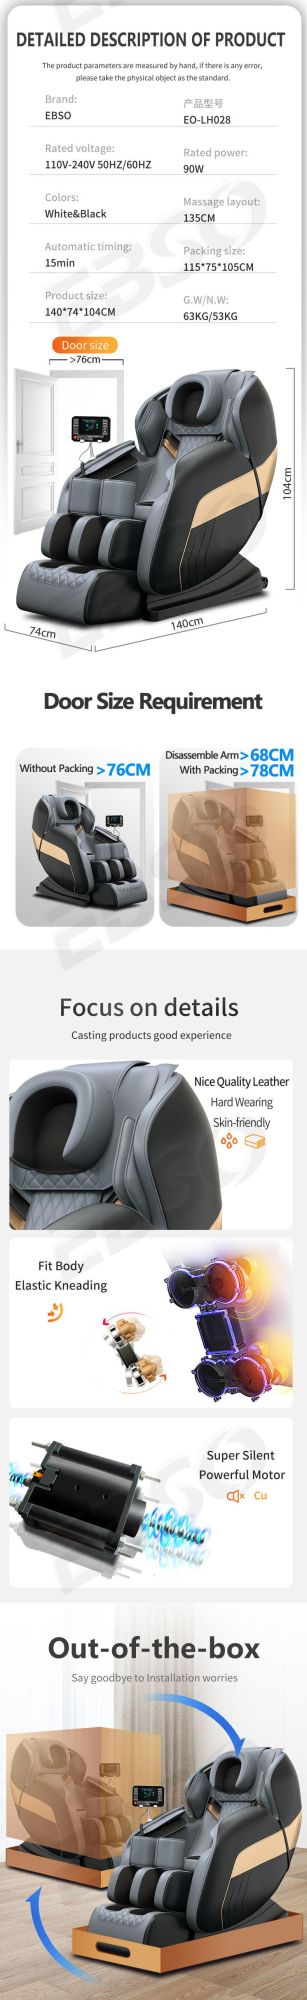 Export Quality Products Luxury High-End Massage Chair Hottest Promotion